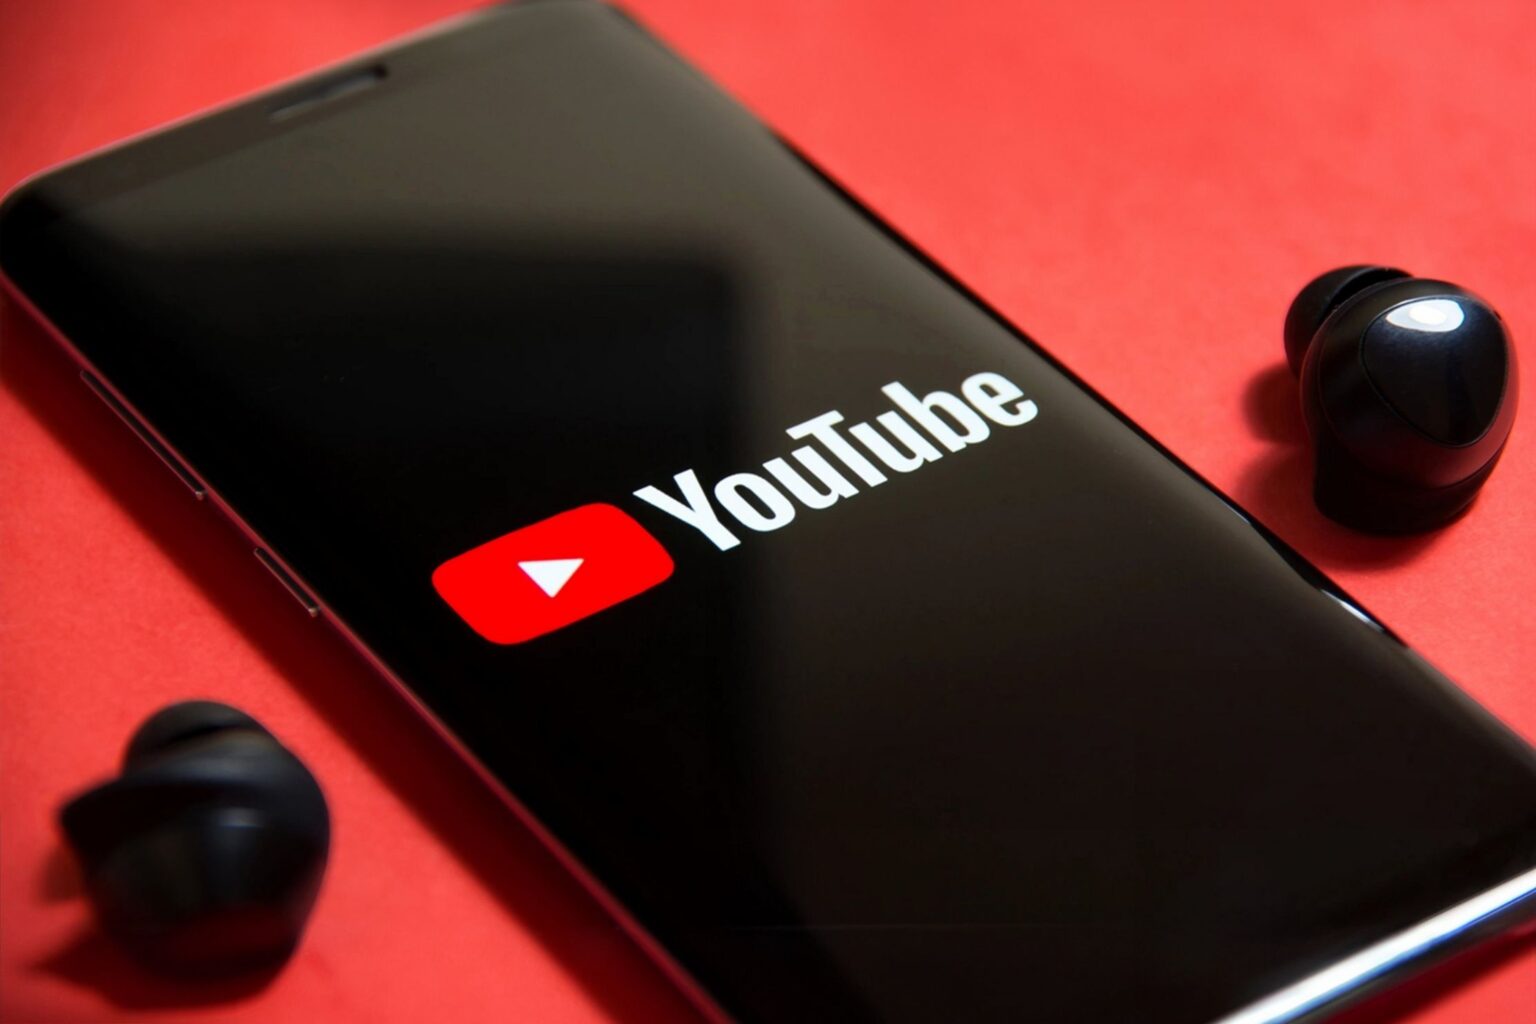 YouTube Experiments with New Hum-to-Search Feature on Android